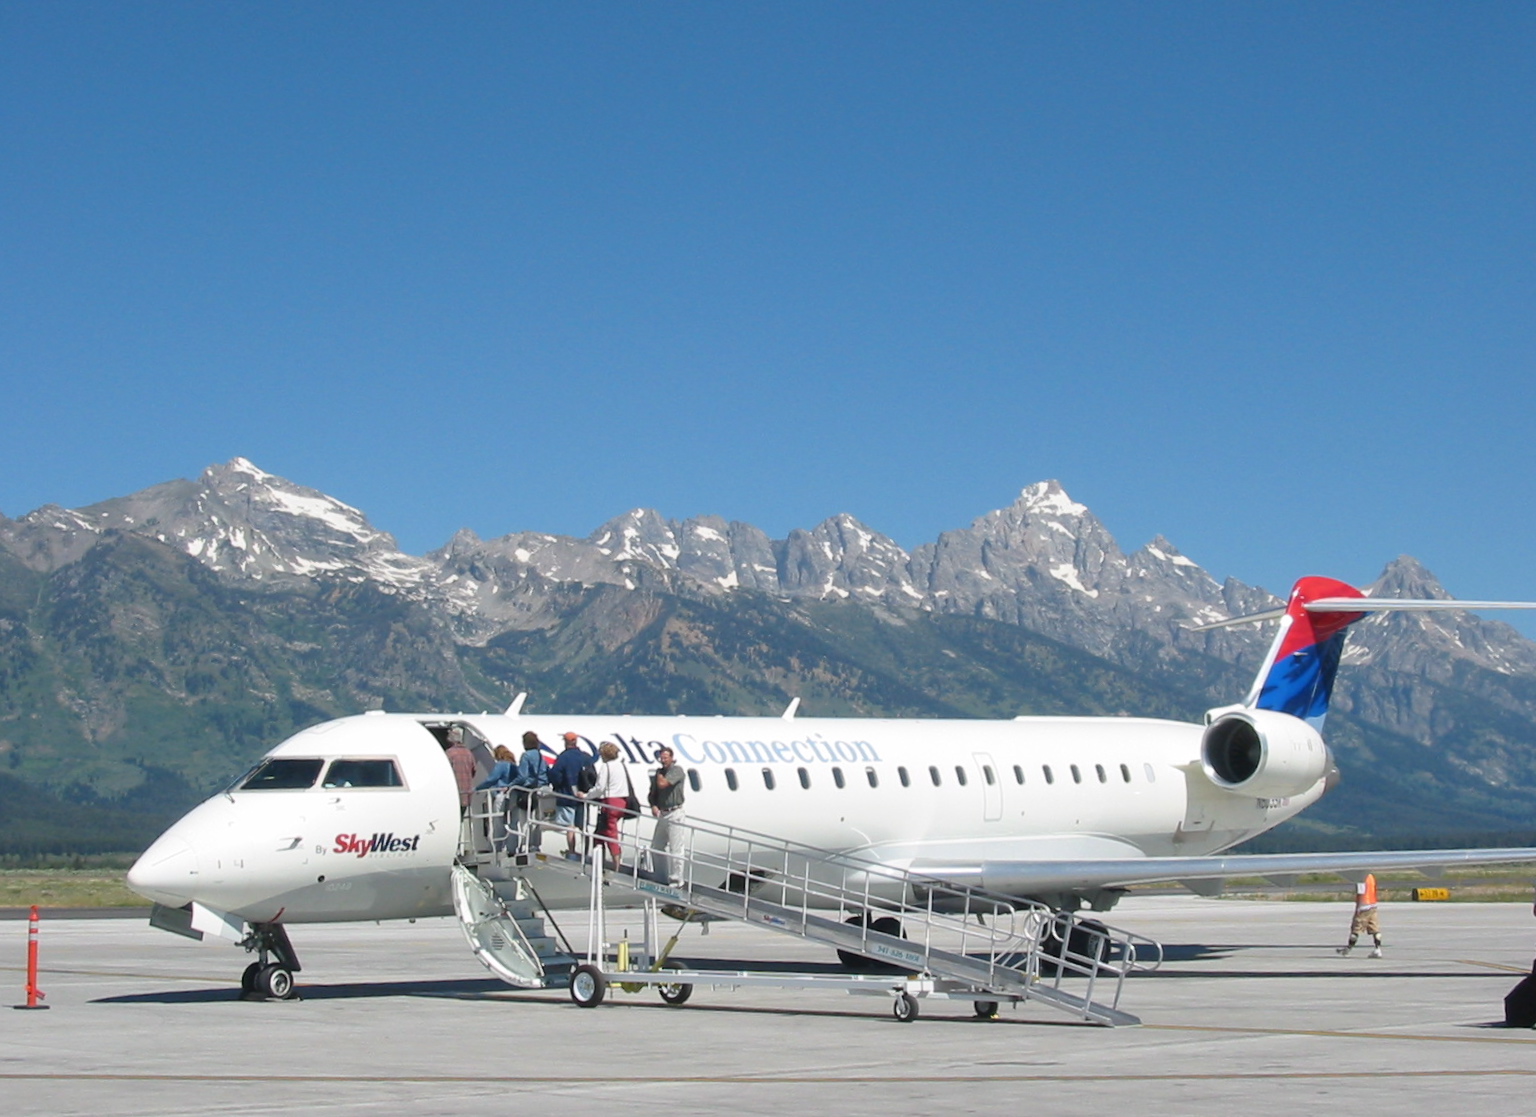 JAC airport with Tetons